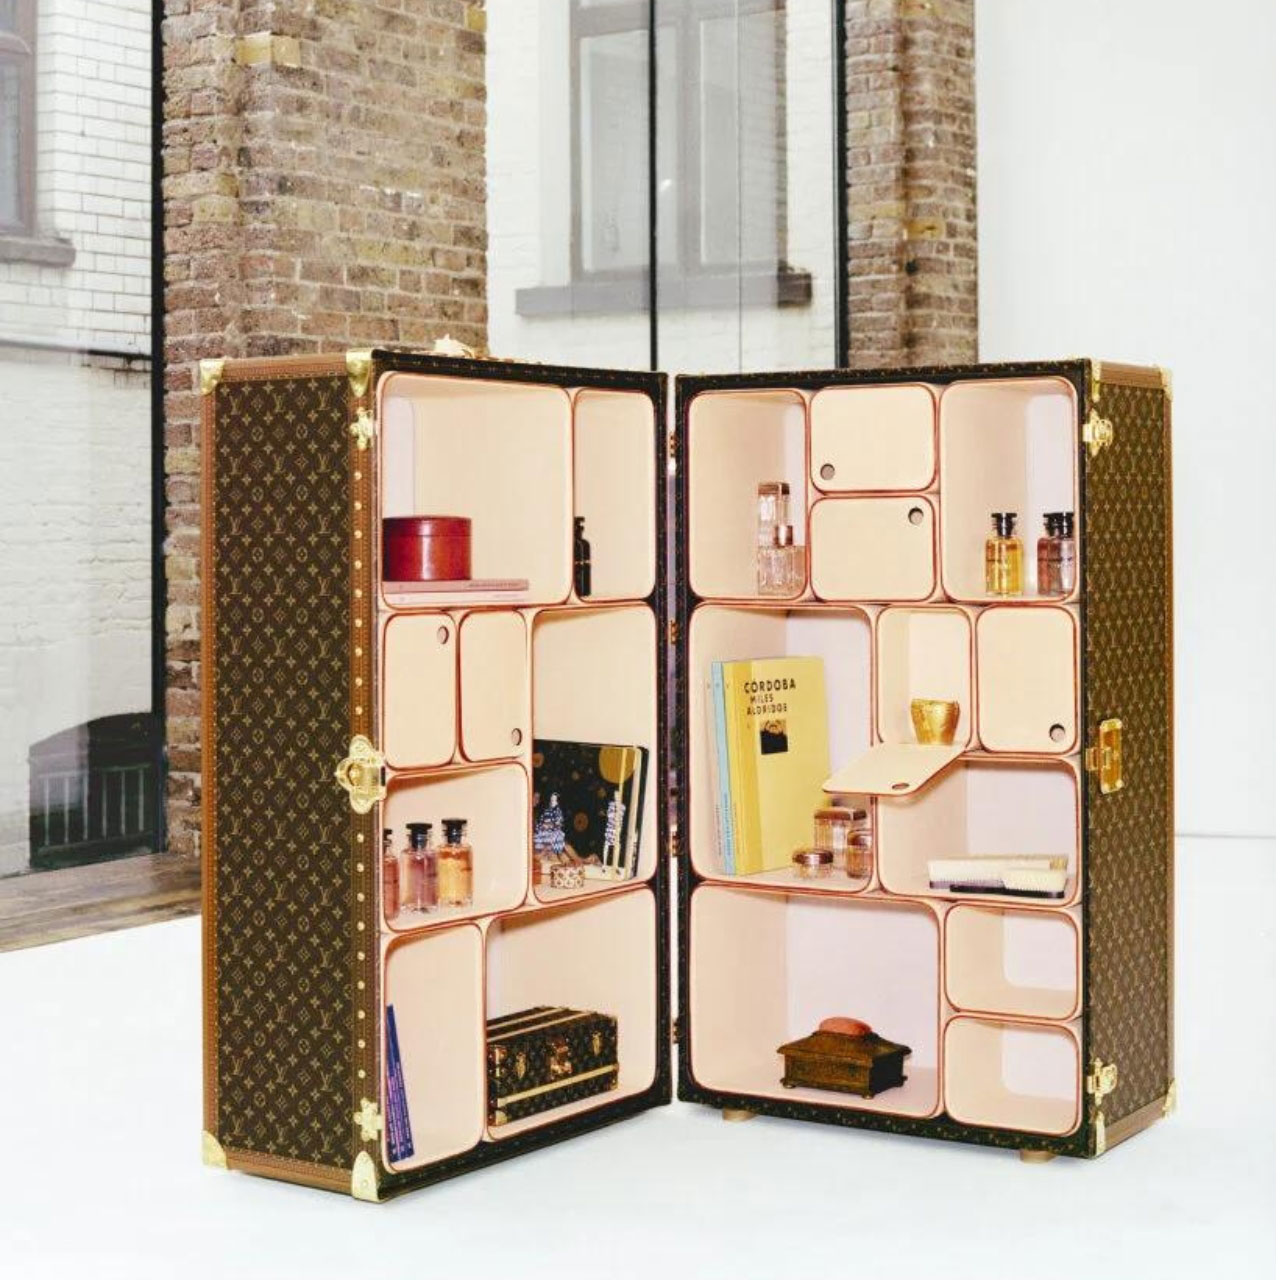 Cabinet of Curiosities by Marc Newson